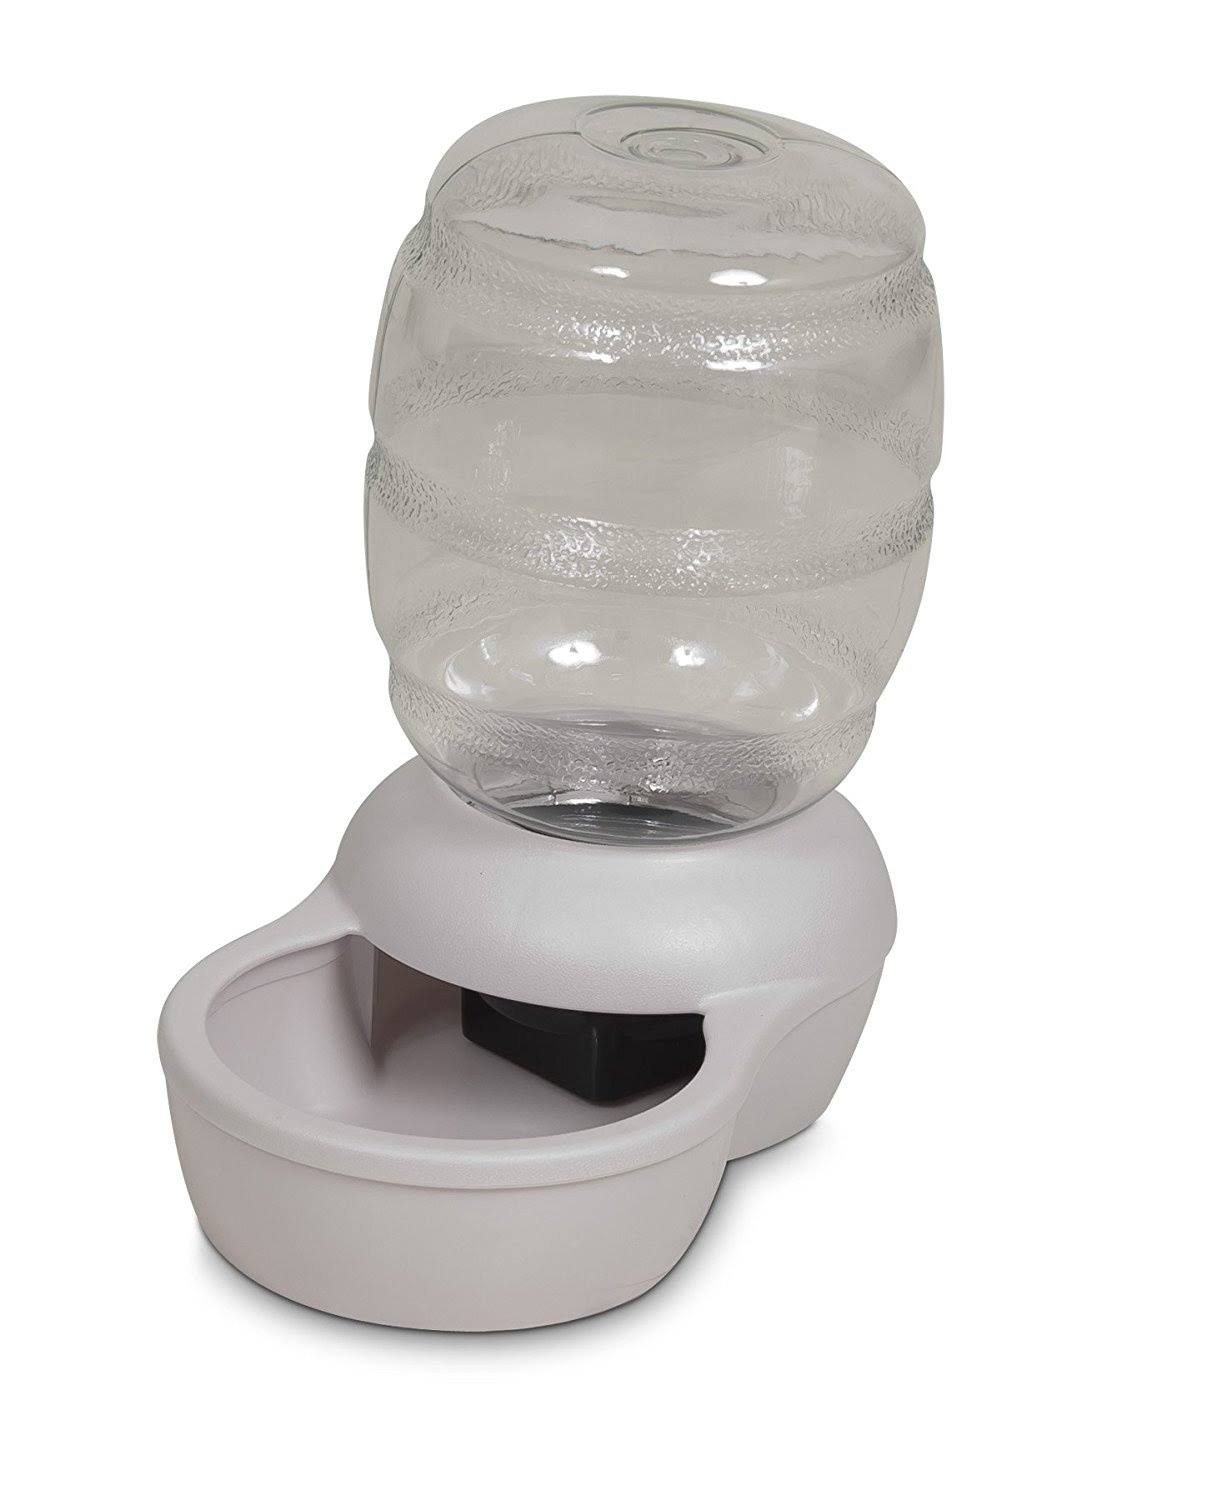 Petmate Replenish Pet Waterer With Microban - Pearl White